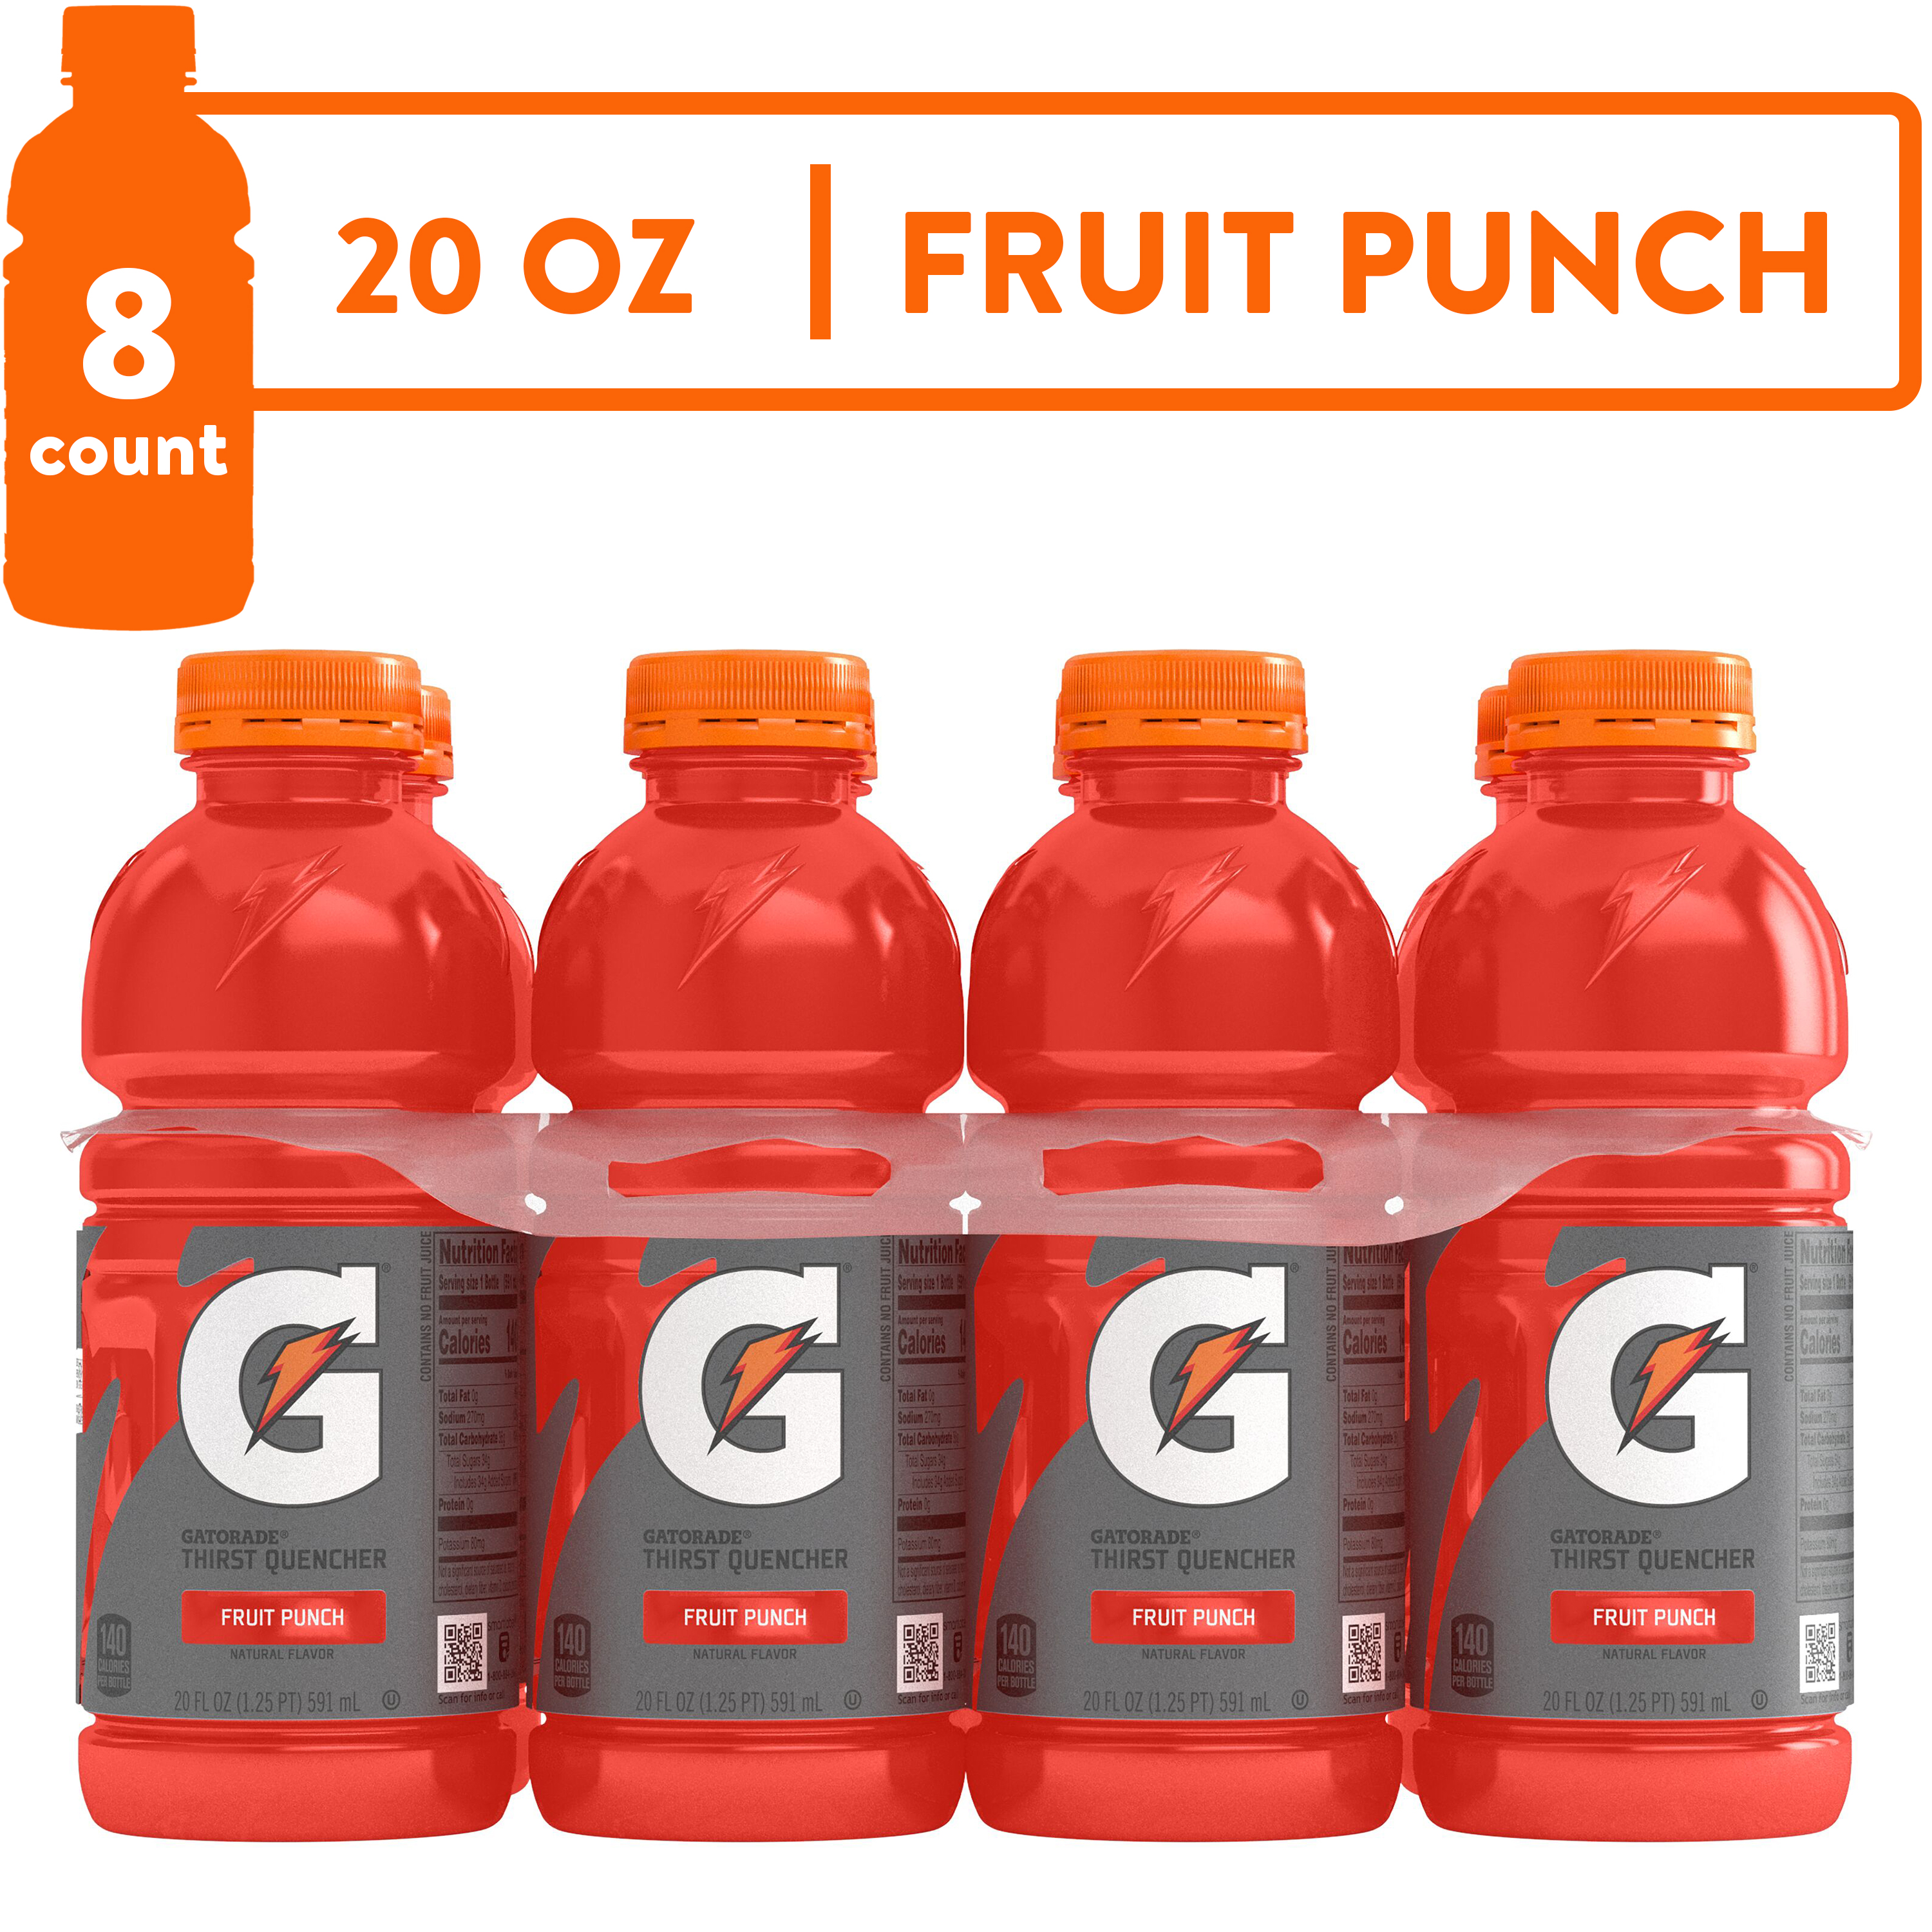 Gatorade Thirst Quencher, Fruit Punch Sports Drinks, 20 fl oz, 8 Count Bottles - image 1 of 9